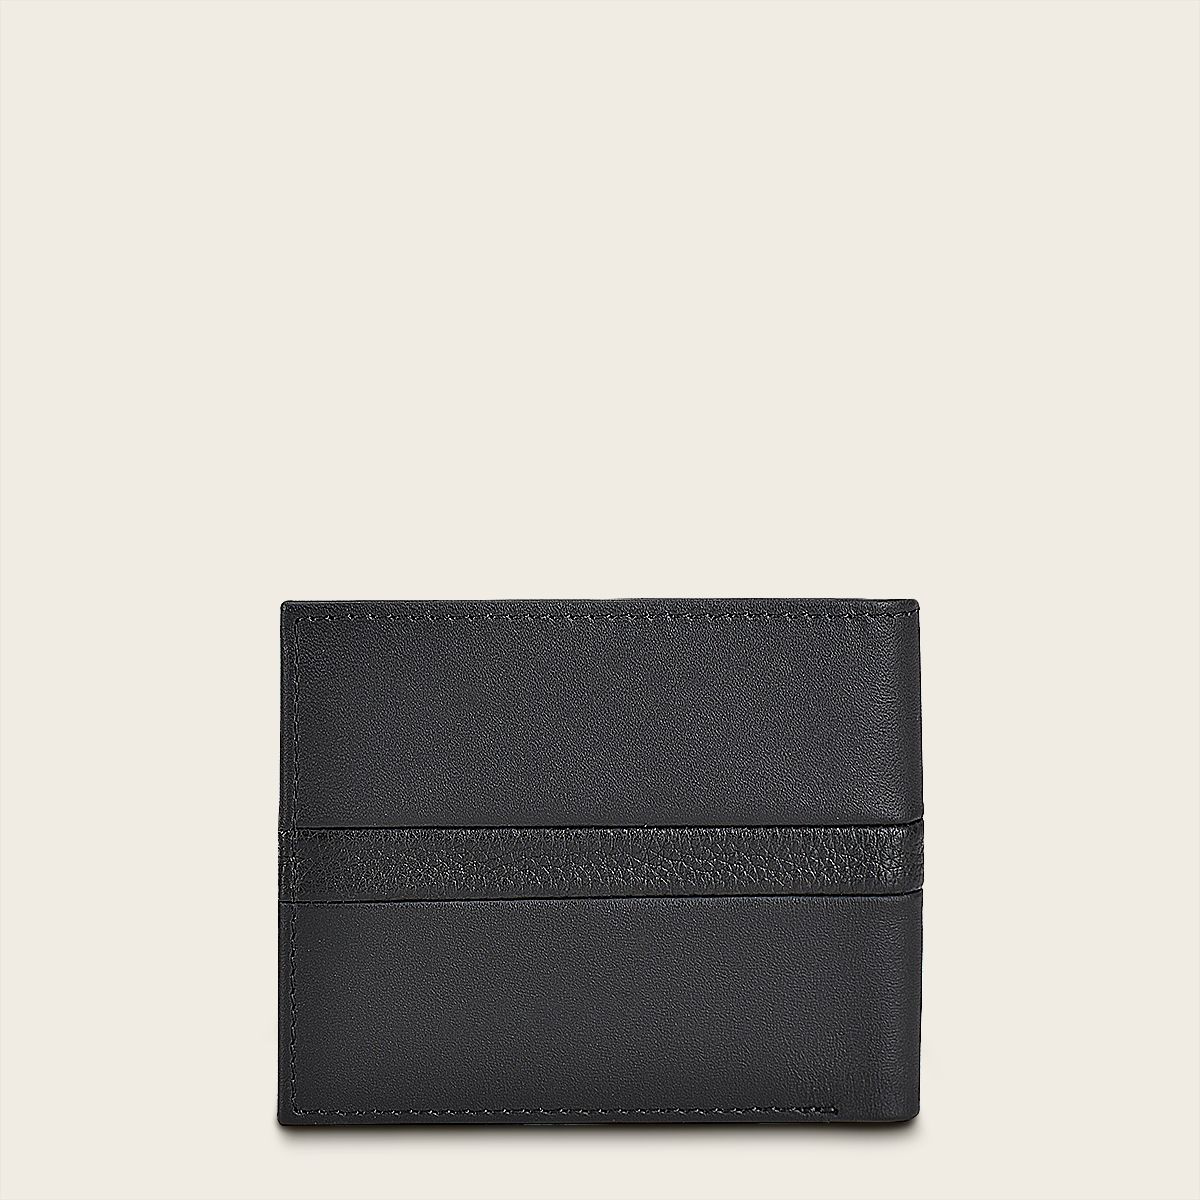 Contrasting leather strap black leather wallet 4